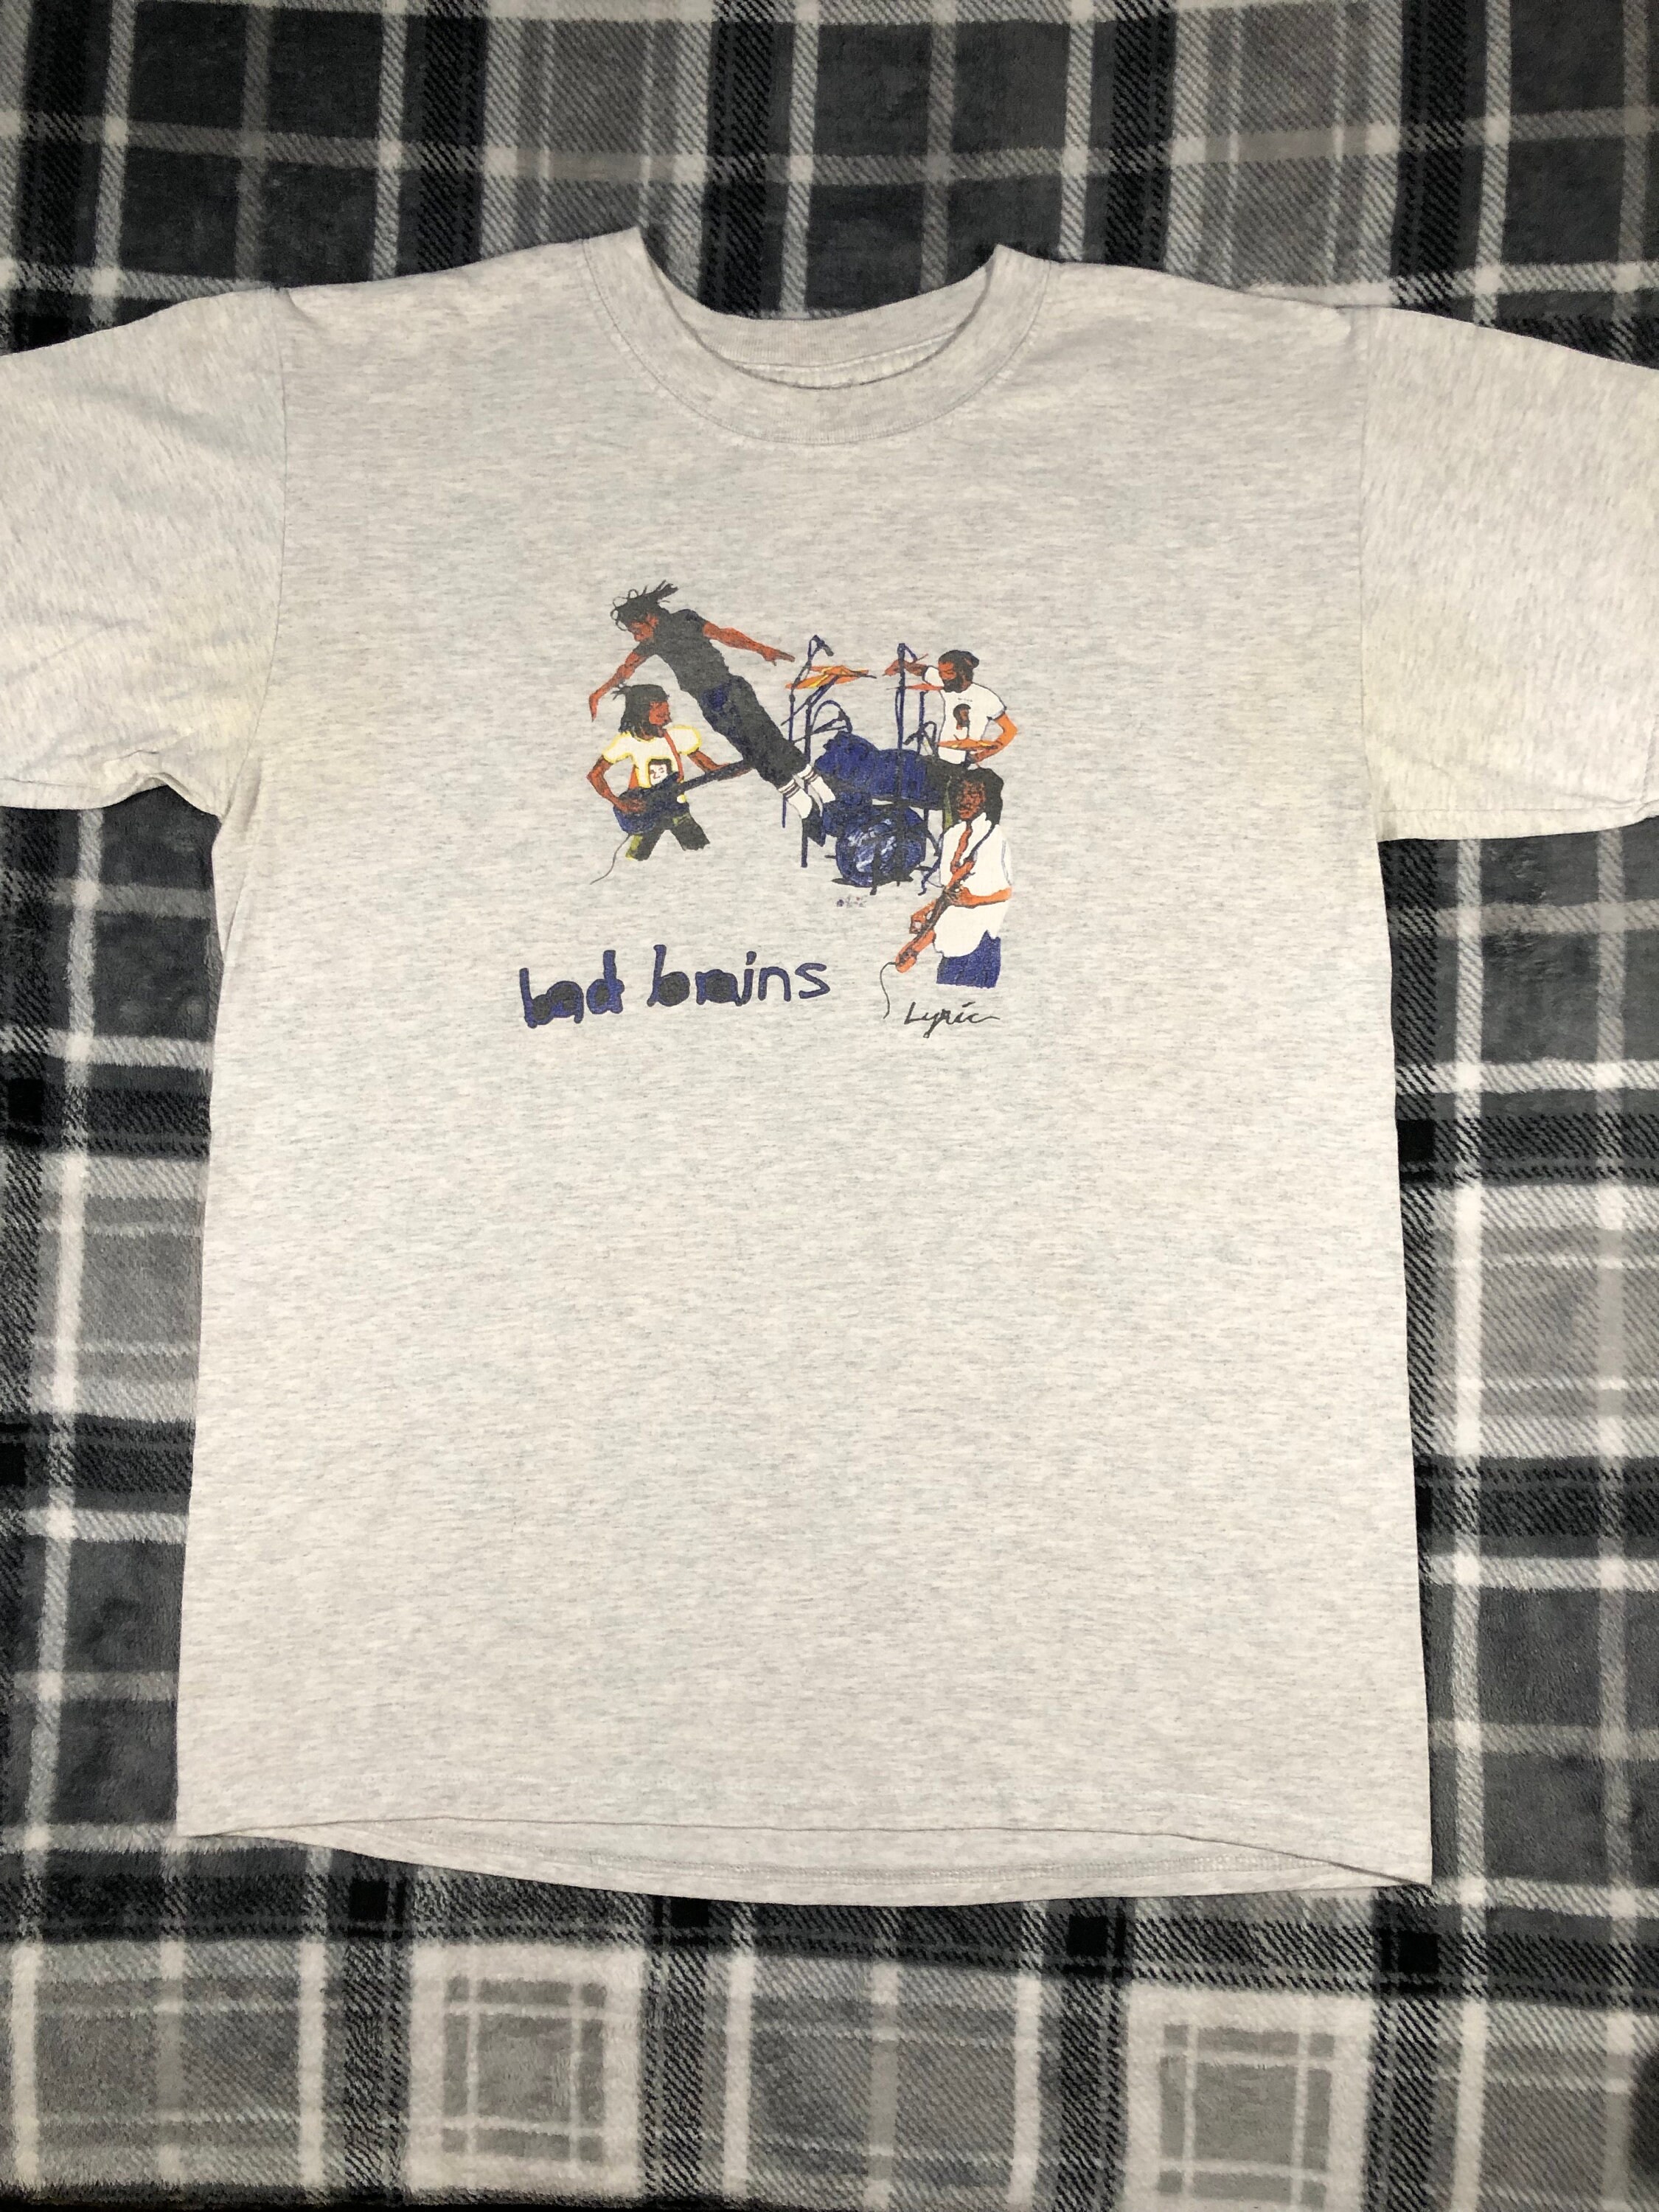 Vintage 1991 Bad Brains You Gonna Get Yours Tour T-Shirt – Mills